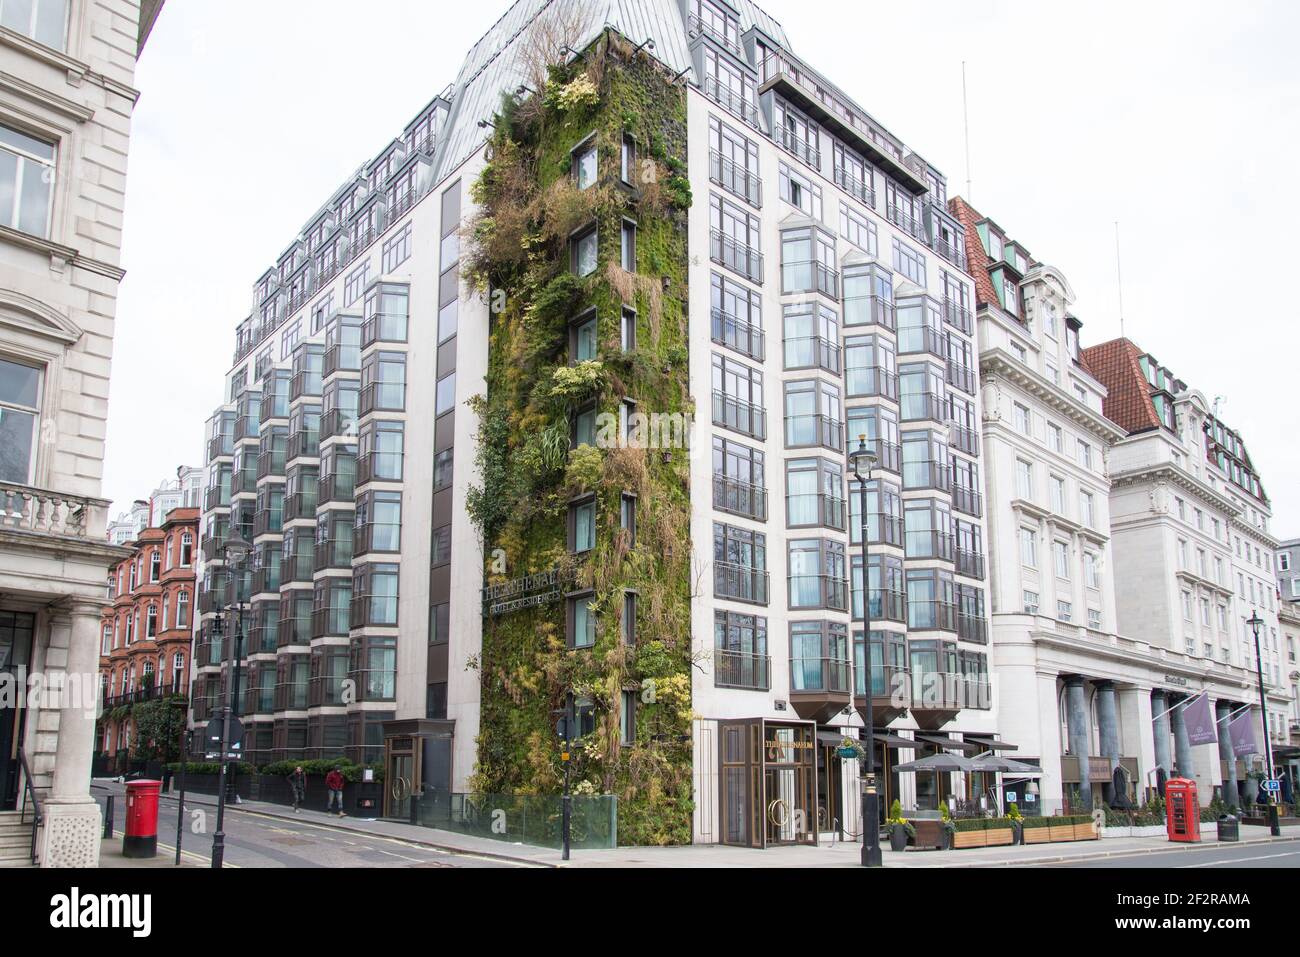 Living Green Wall Vertical Garden The Athenaeum Hotel & Residences 116 Piccadilly Vertical Garden by Kinnersley Kent Design Patrick Blanc Stock Photo